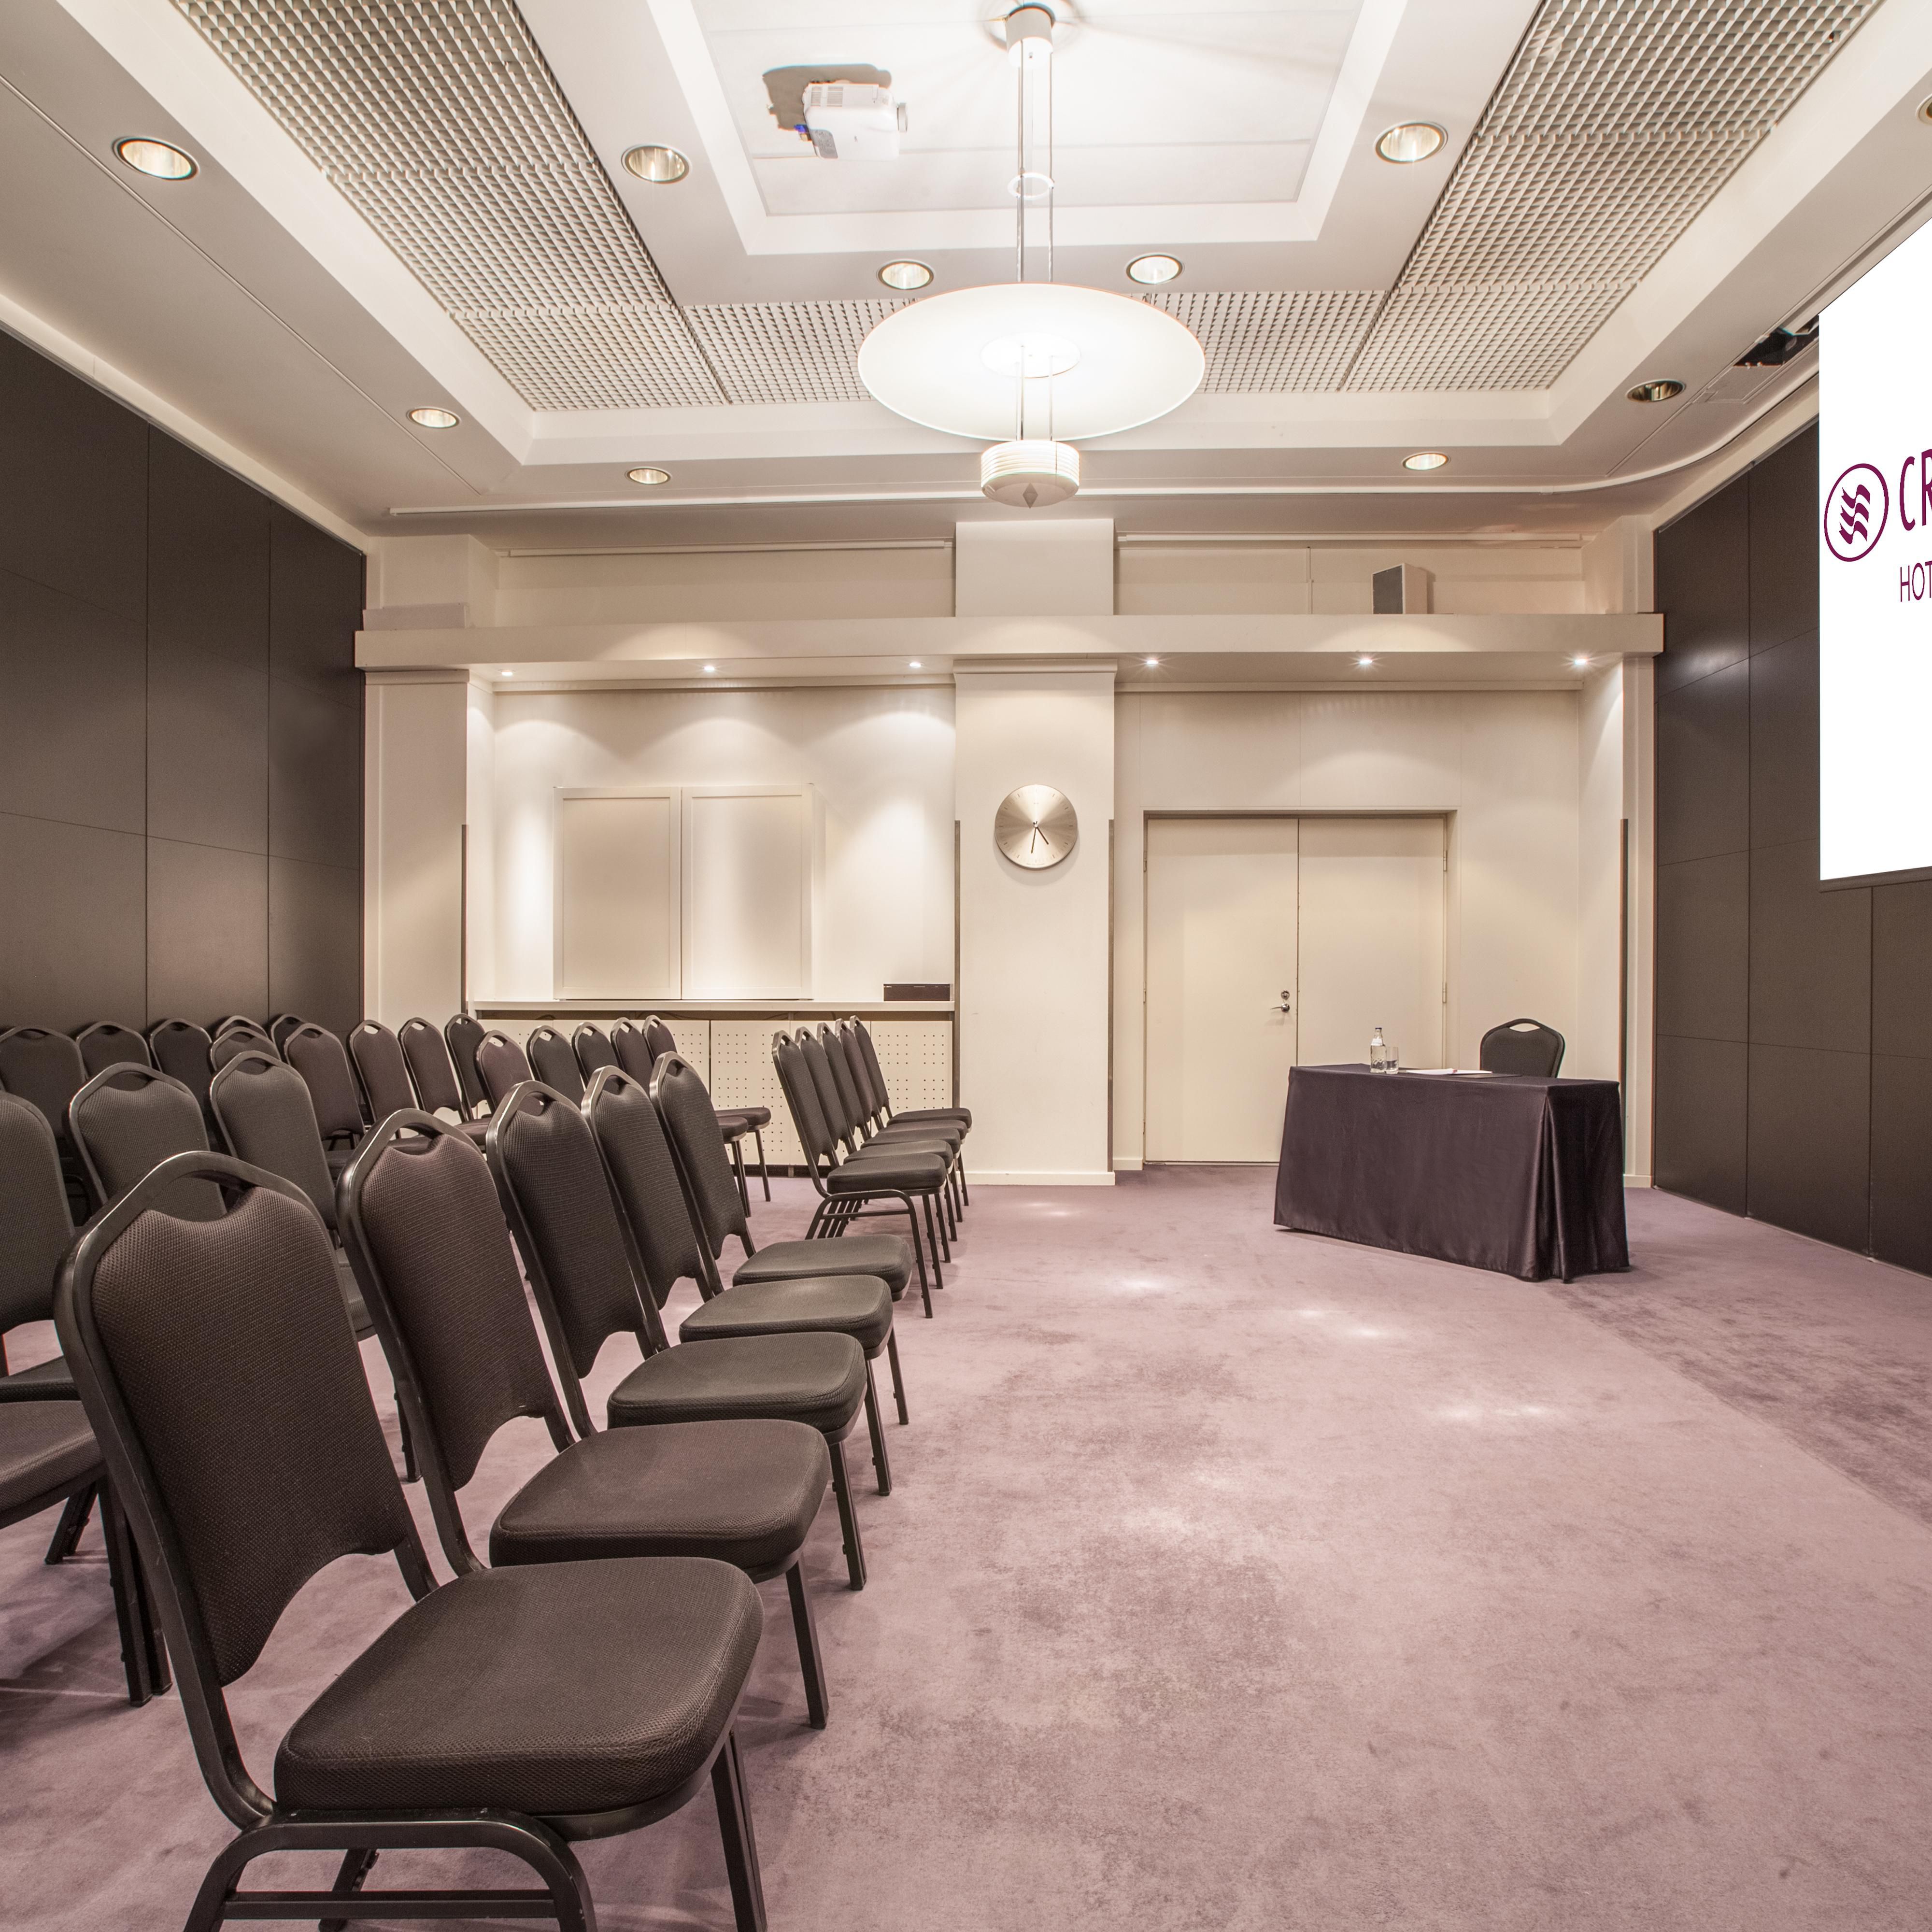 Royal at Crowne Plaza&#39;s meeting room 4 caters up to 60 persons